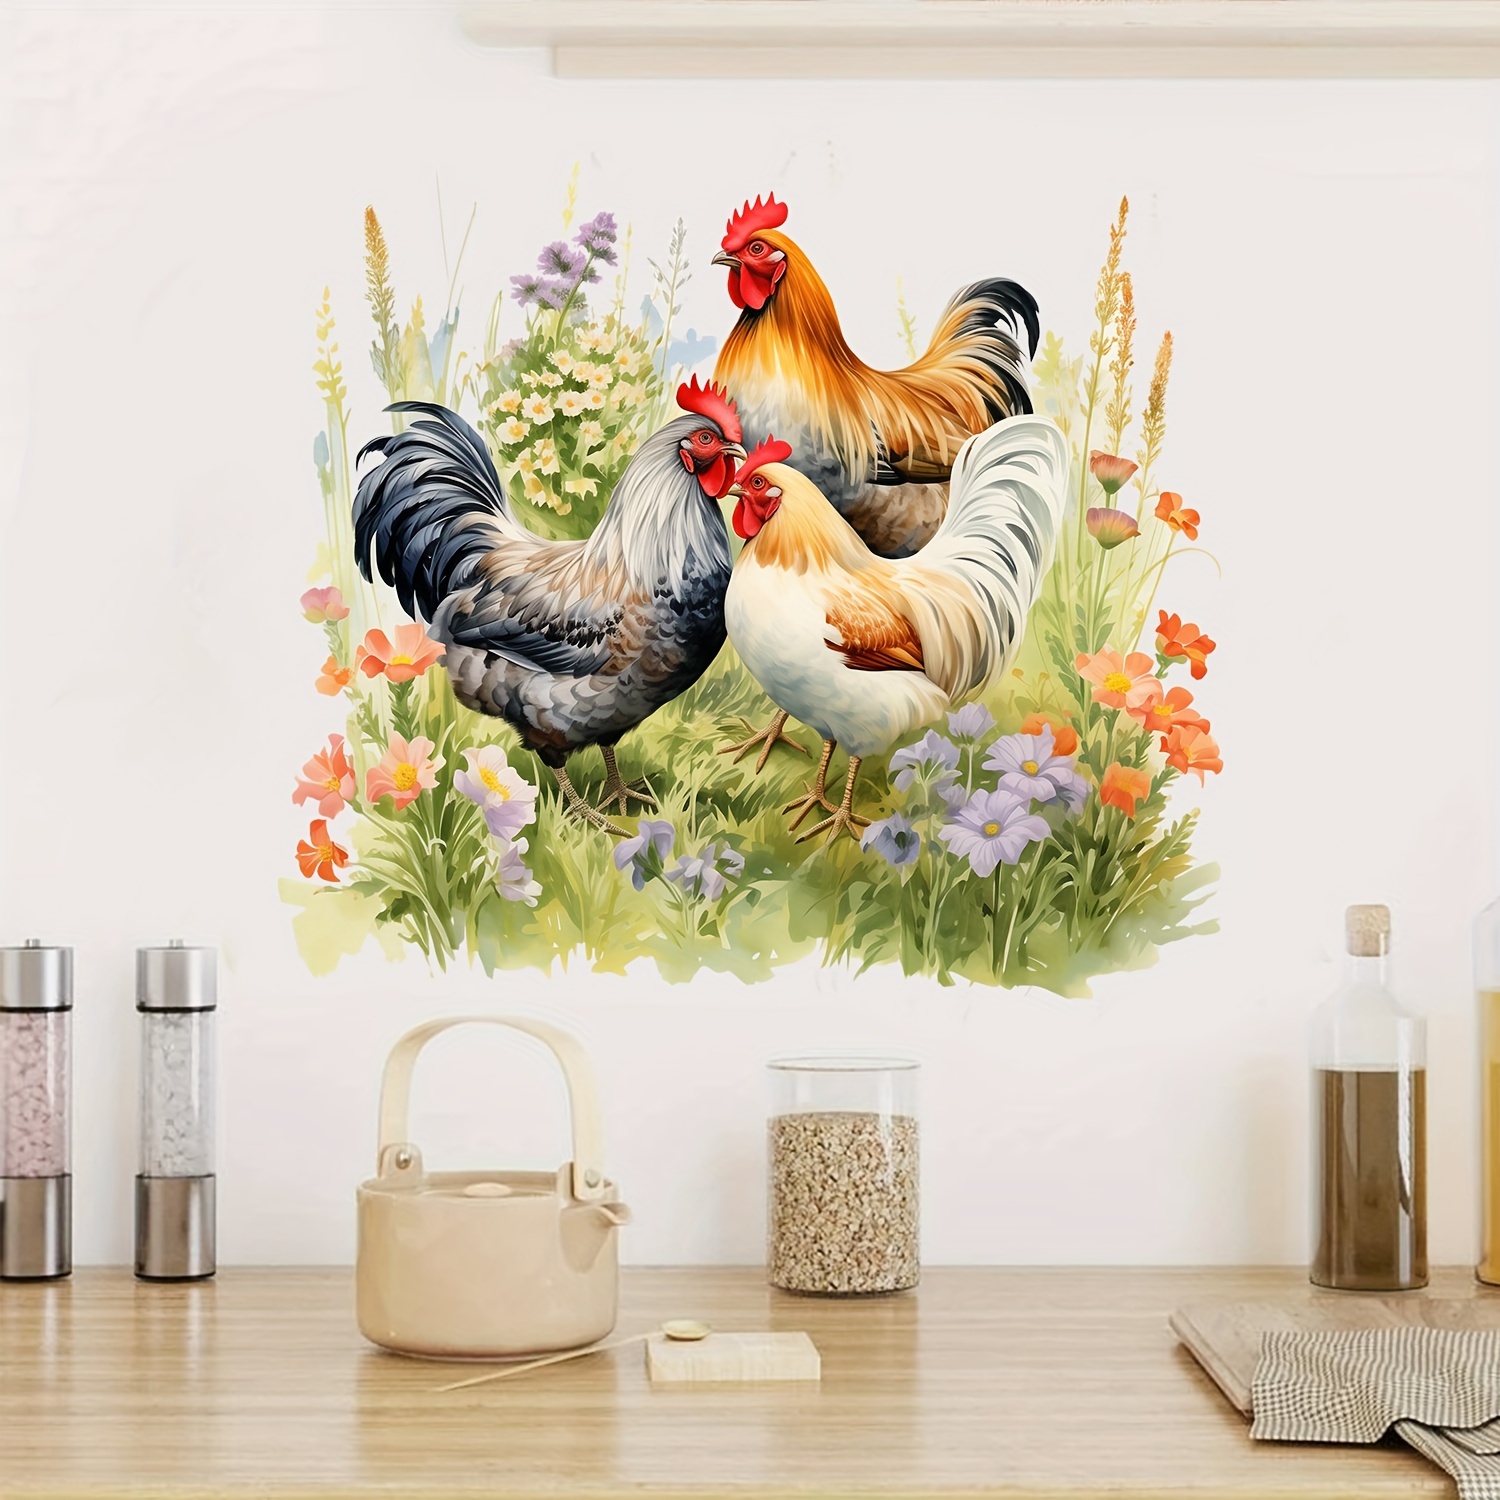 

Modern Farmhouse Rooster And Hen With Flowers Wall Decals - 1pc Animal Print Plastic Wall Stickers, Detachable Semi-glossy Self-adhesive Home Decor For Living Spaces